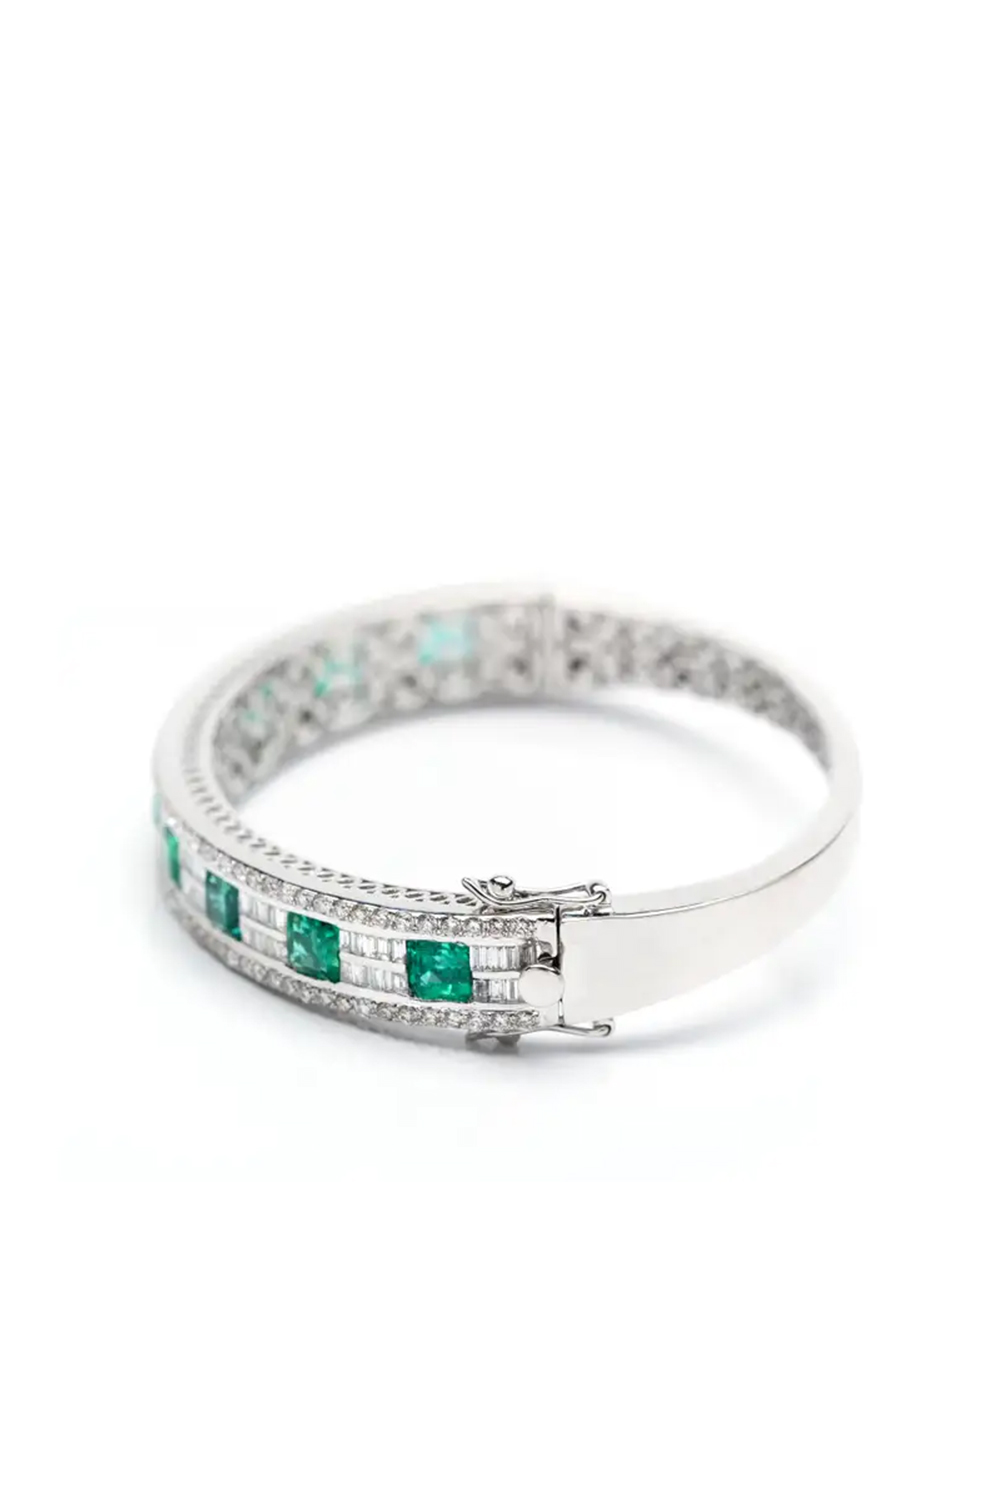 Natural Zambian Emerald Bracelet with 6.18 Carats Emerald and 3.05 Carats